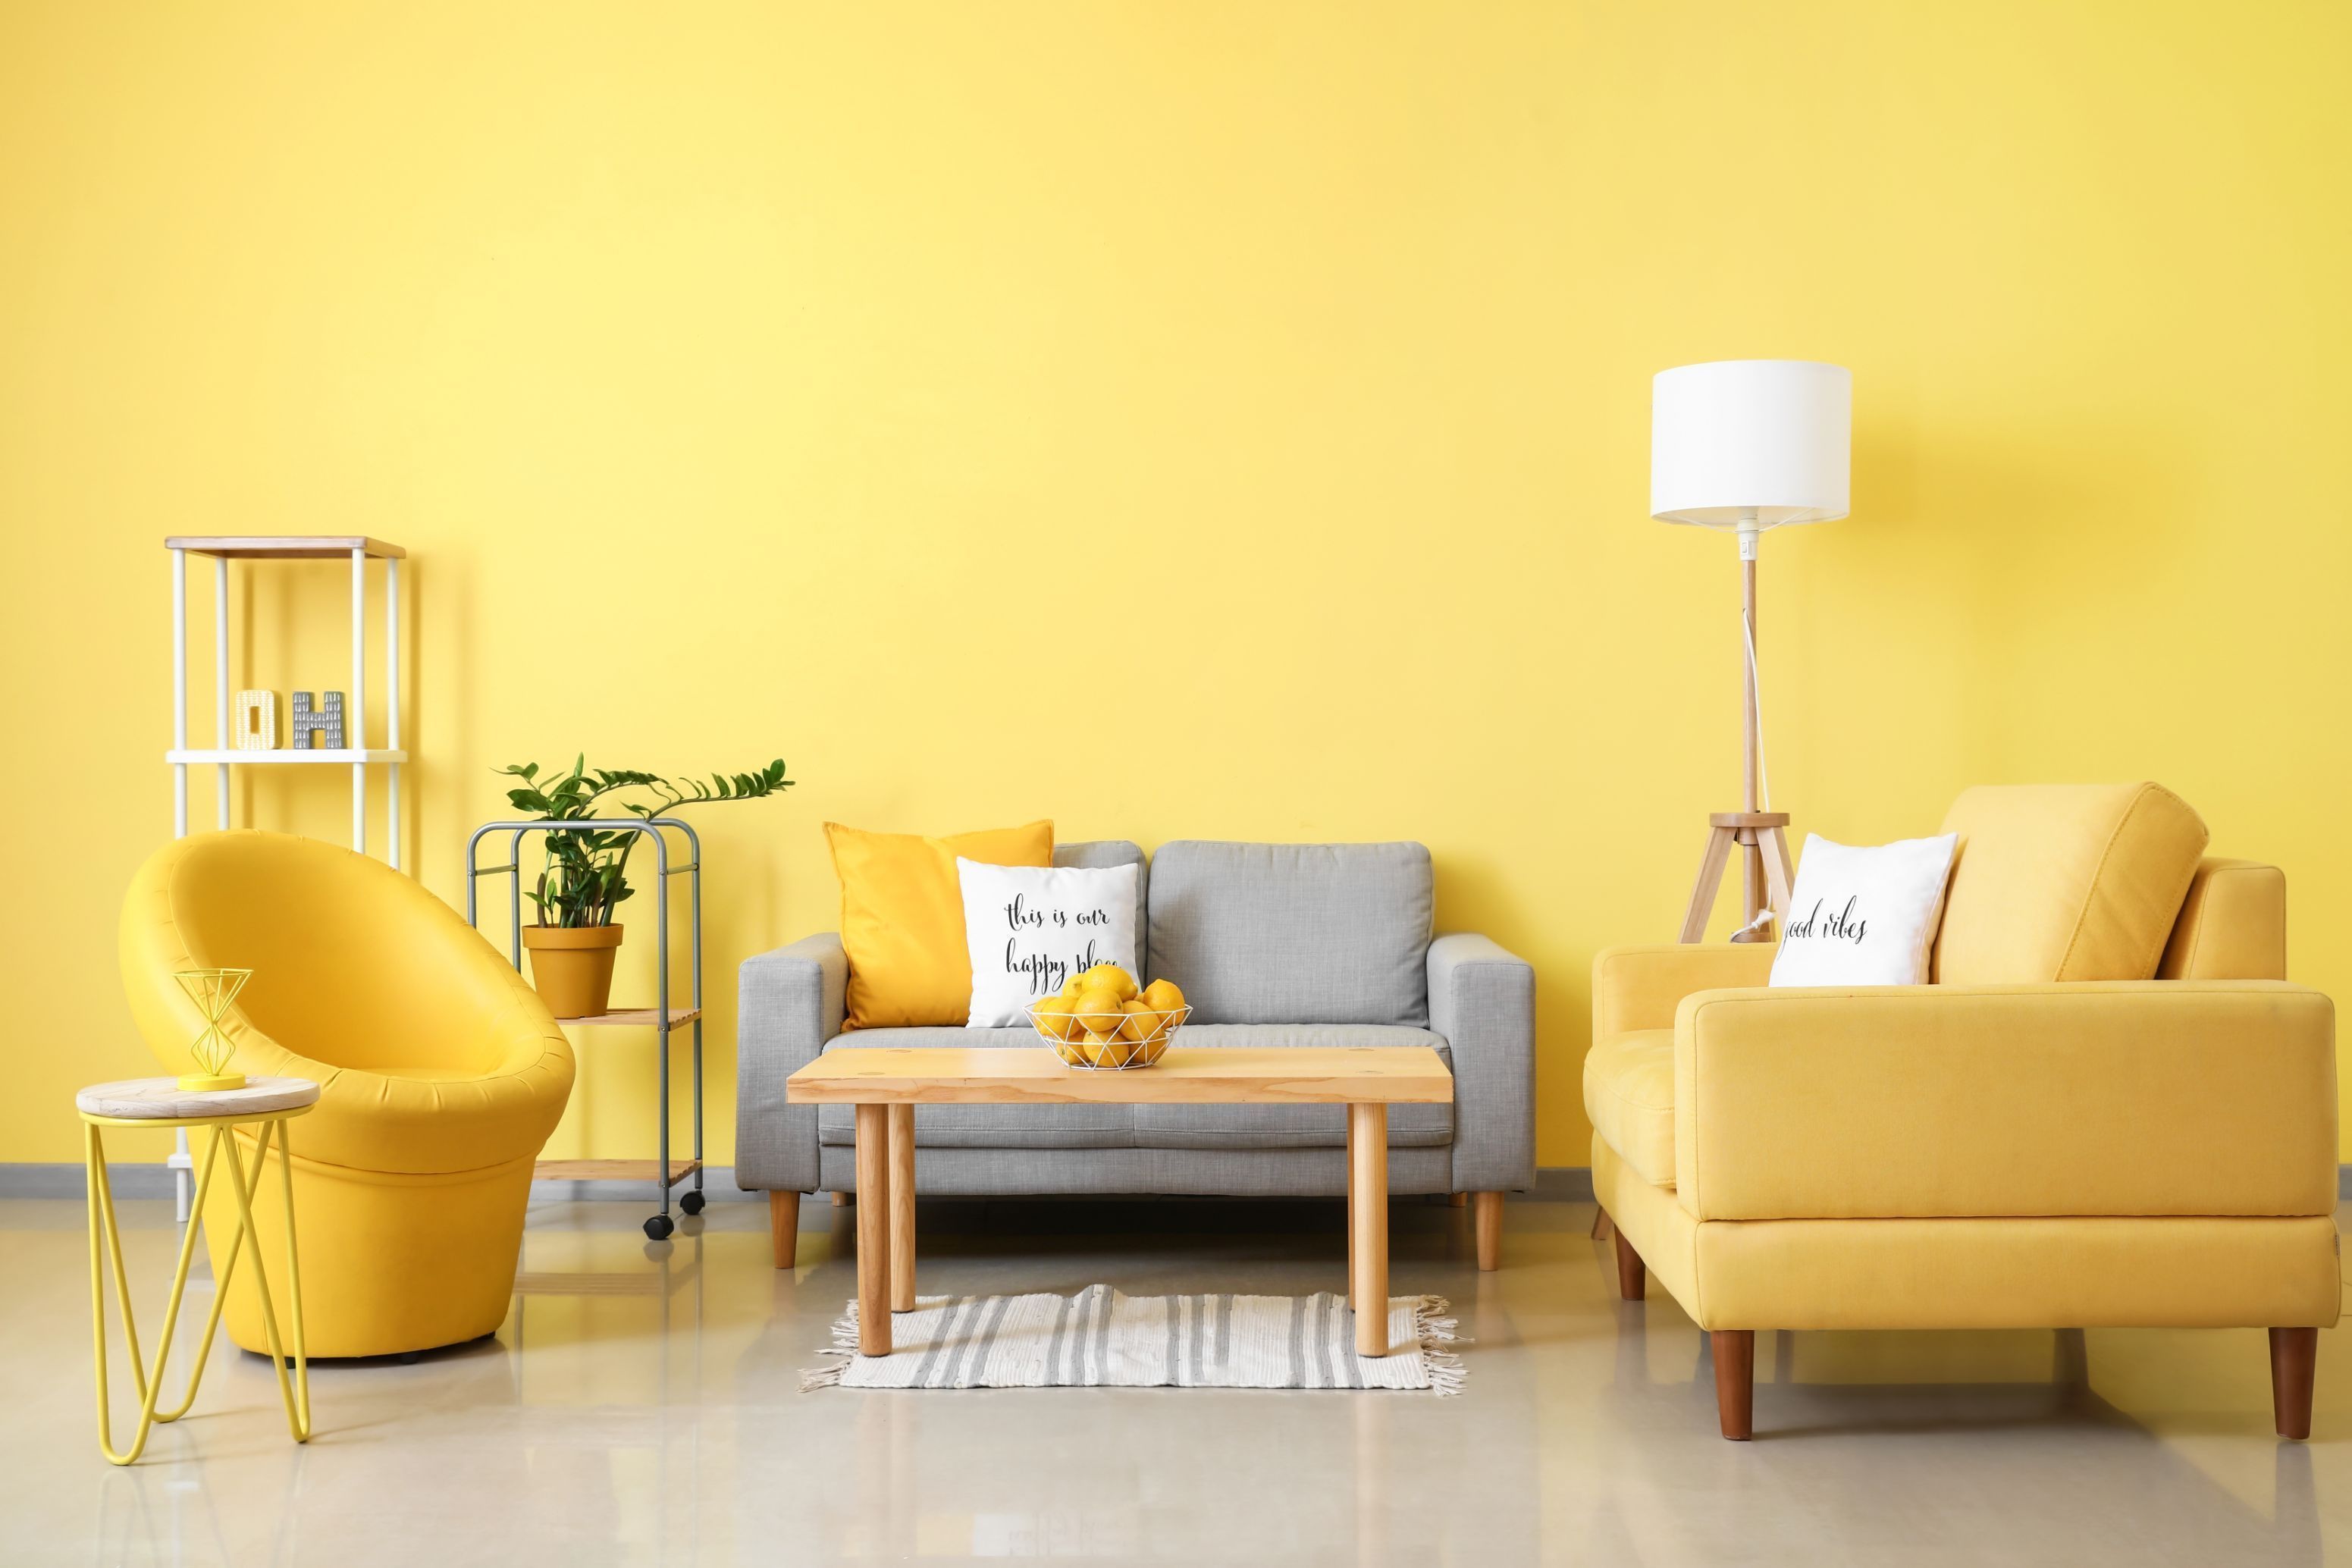 23 Yellow Living Room Ideas for a Bright, Happy Space